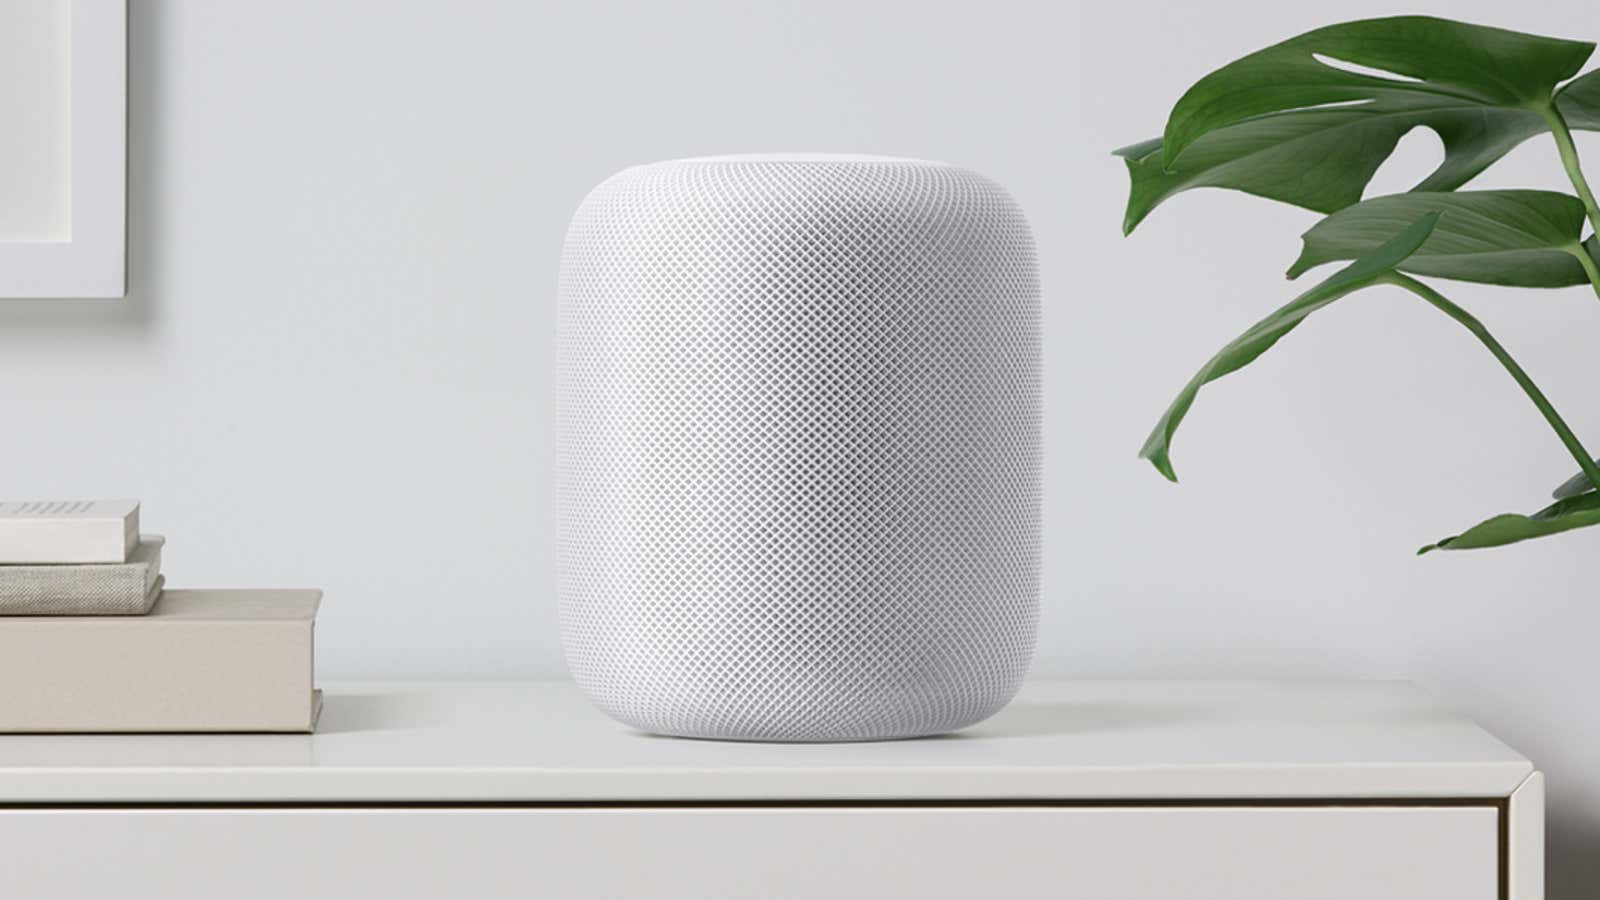 Apple’s newest gadget, the HomePod.